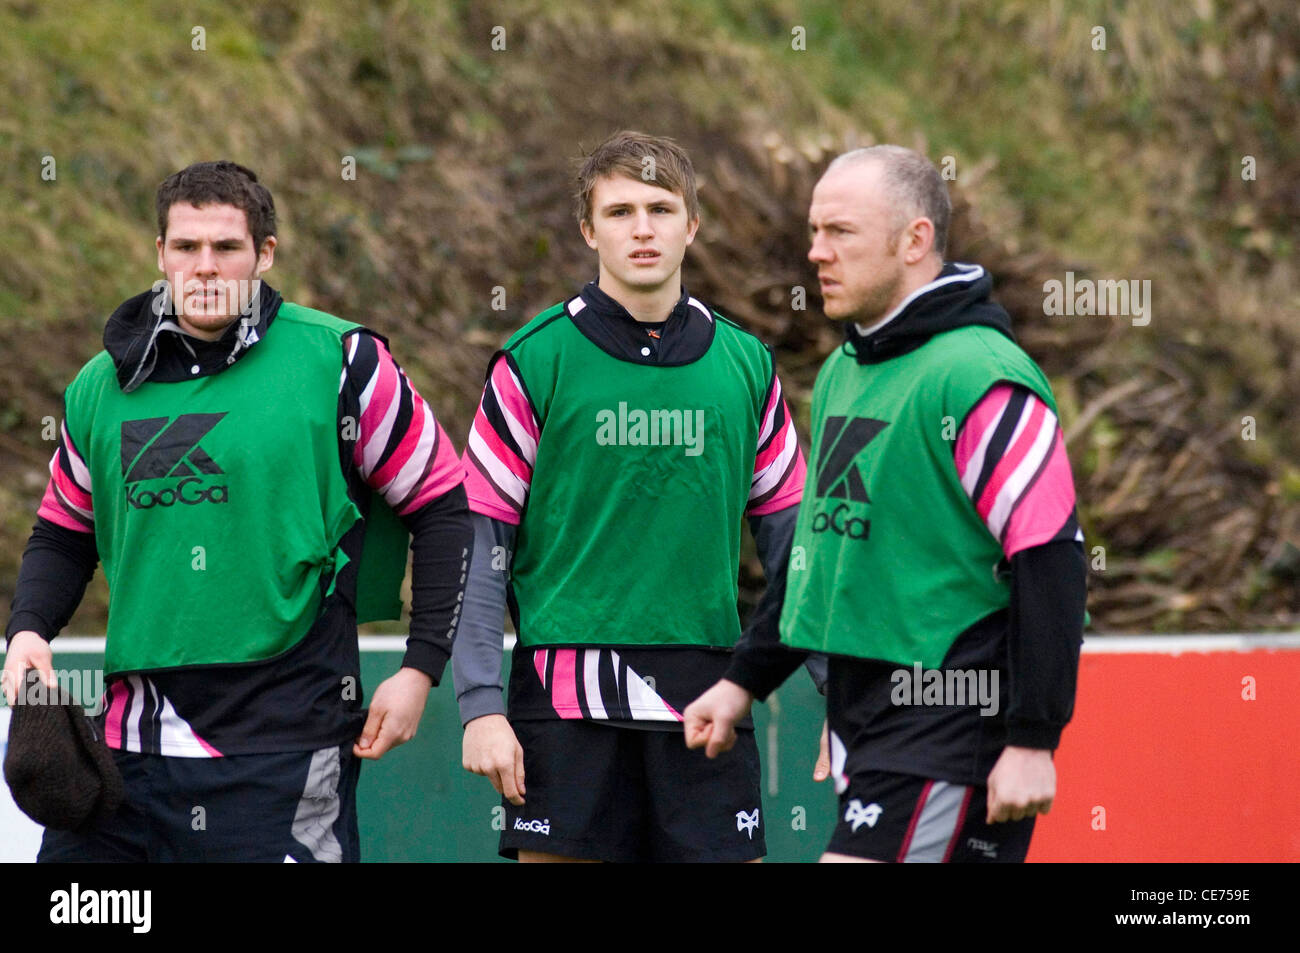 Ospreys 17-year-old rugby player Tom Prydie (middle). Stock Photo